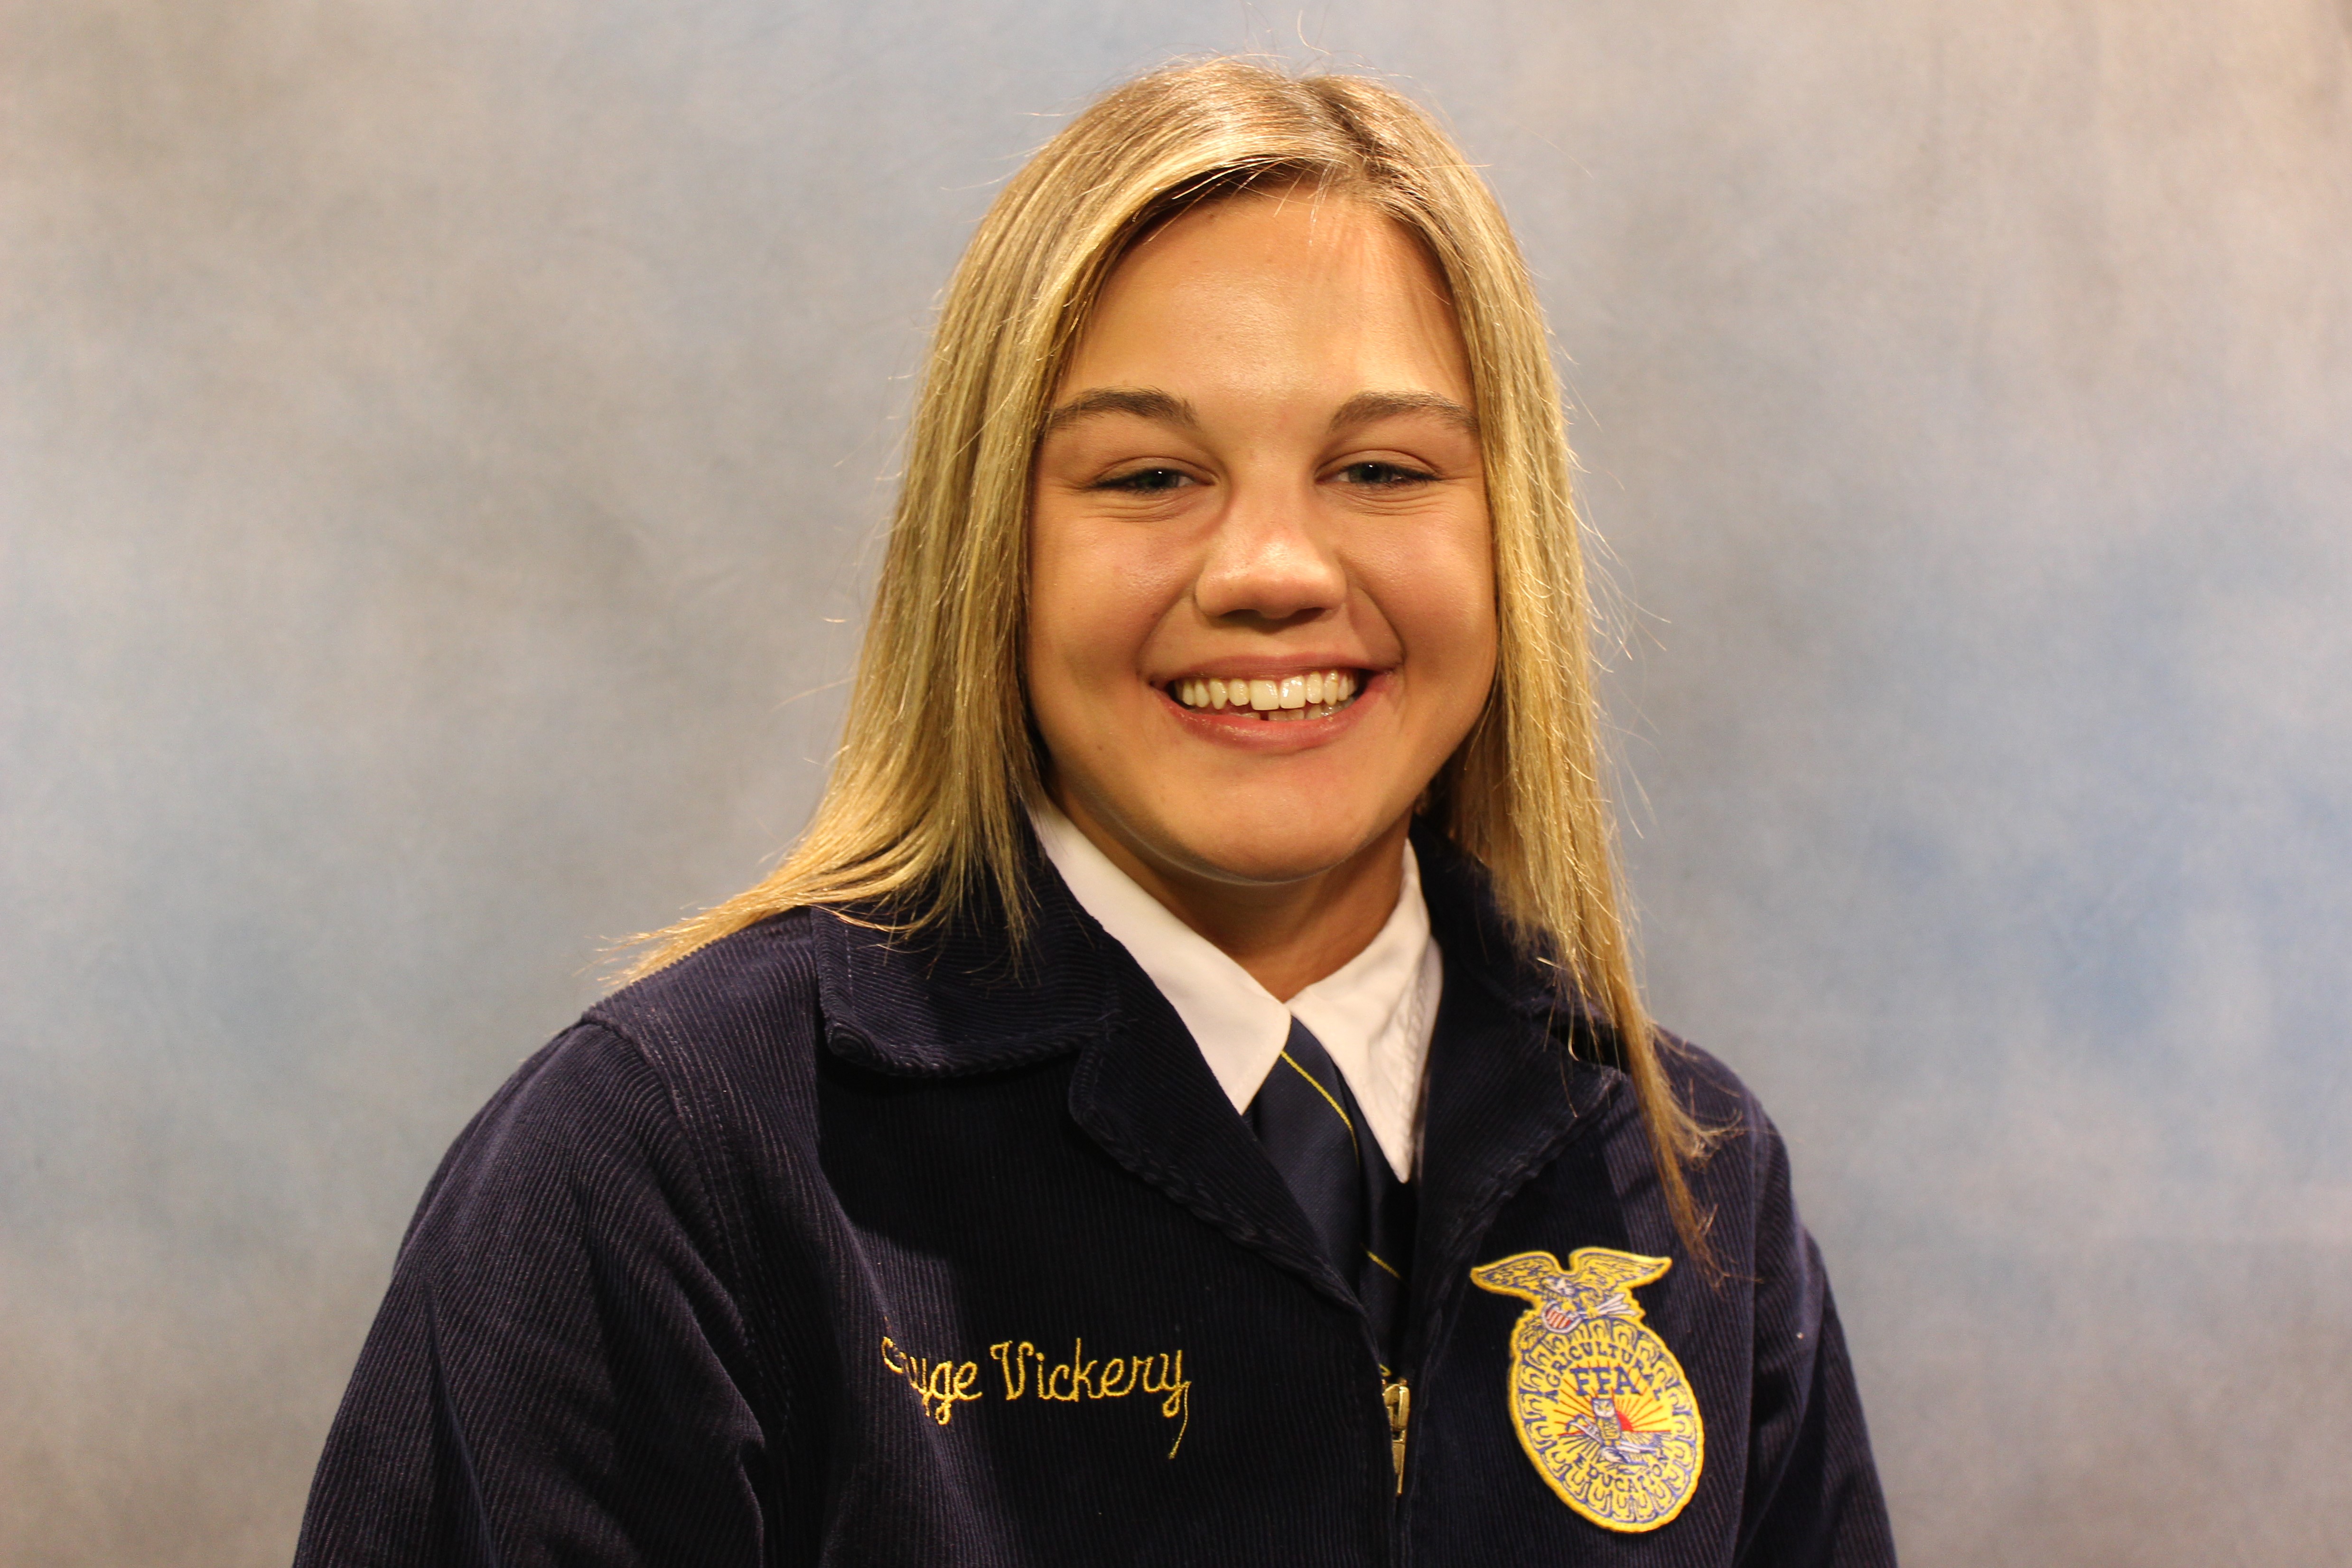 Introducing Sayge Vickrey of the Adair FFA Chapter, Your 2021 Northeast Area Star in Ag Placement 